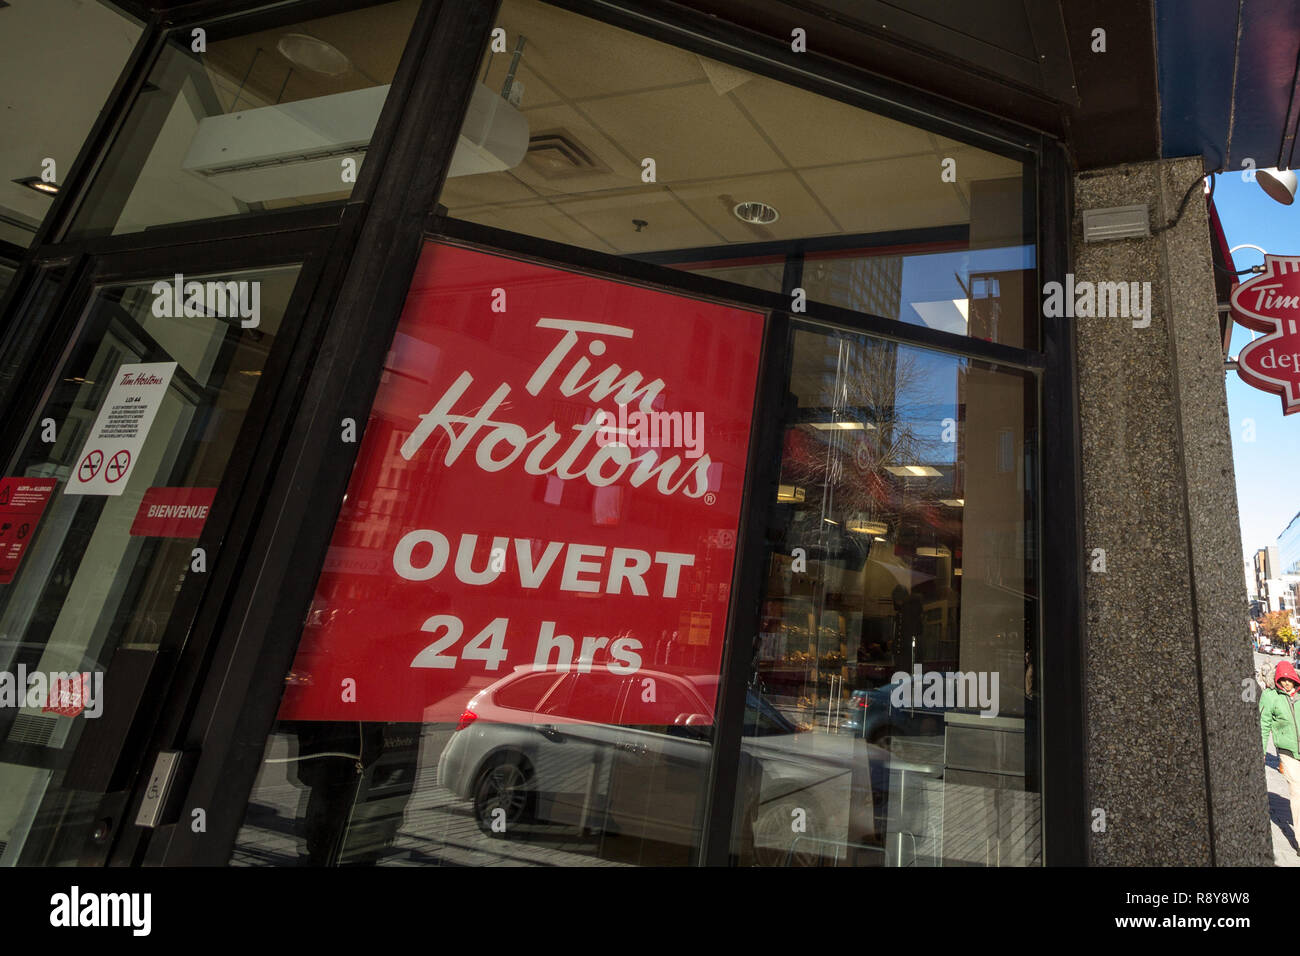 MONTREAL, CANADA - NOVEMBER 4, 2018: Tim Hortons logo in front of one of their restaurants in Montreal, Quebec. Tim Hortons is a cafe and fastfood can Stock Photo